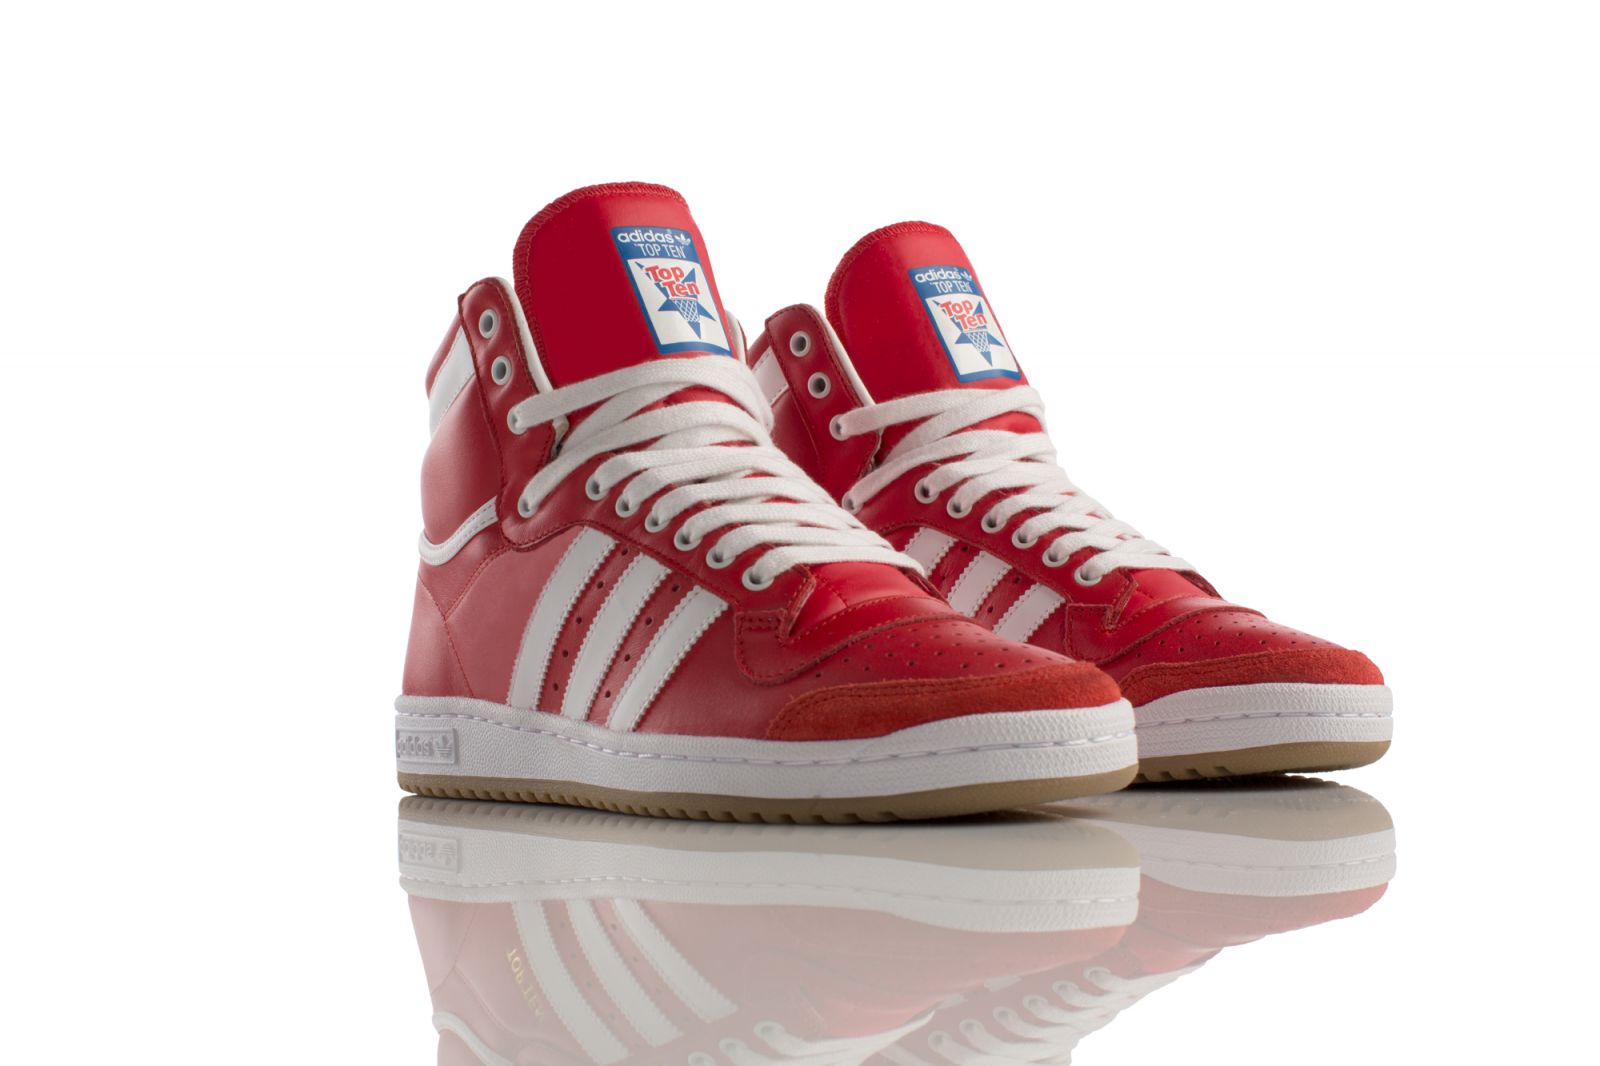 red and white adidas top ten